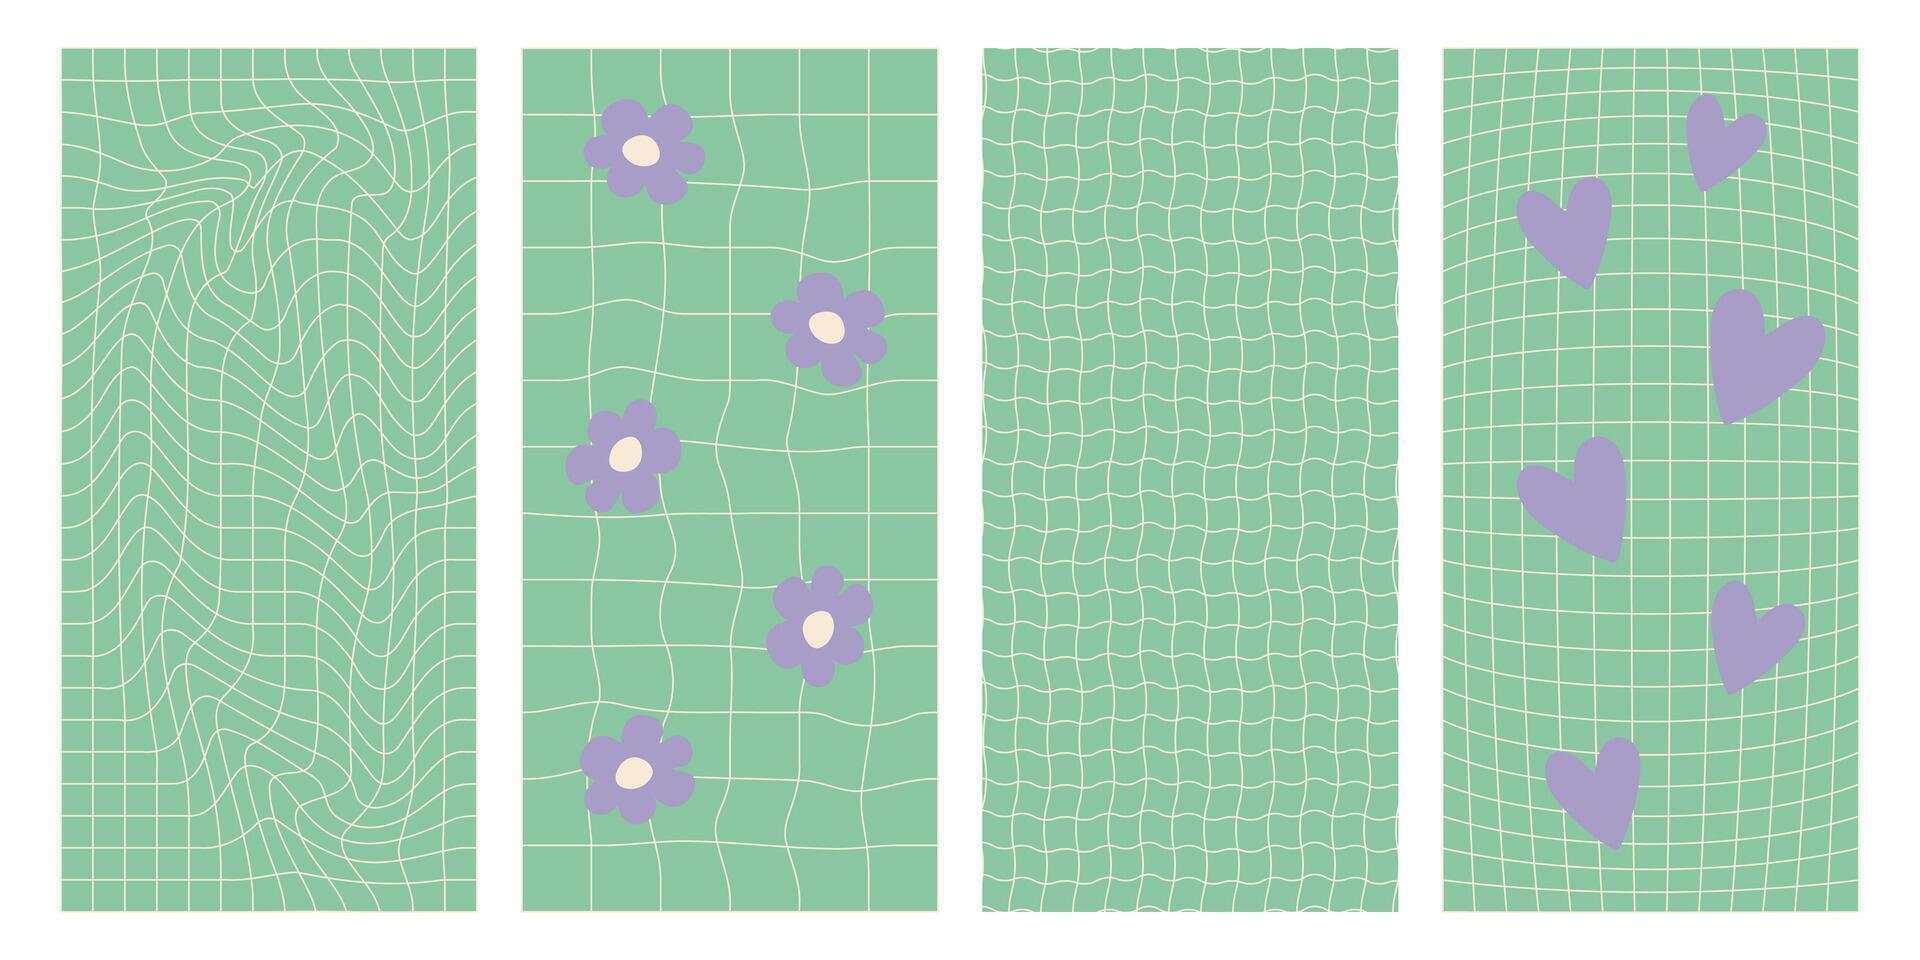 Groovy hippie chessboard pattern set in green pastel colors with purple flowers and hearts. Retro 60s 70s psychedelic geometric backgrounds. . vector